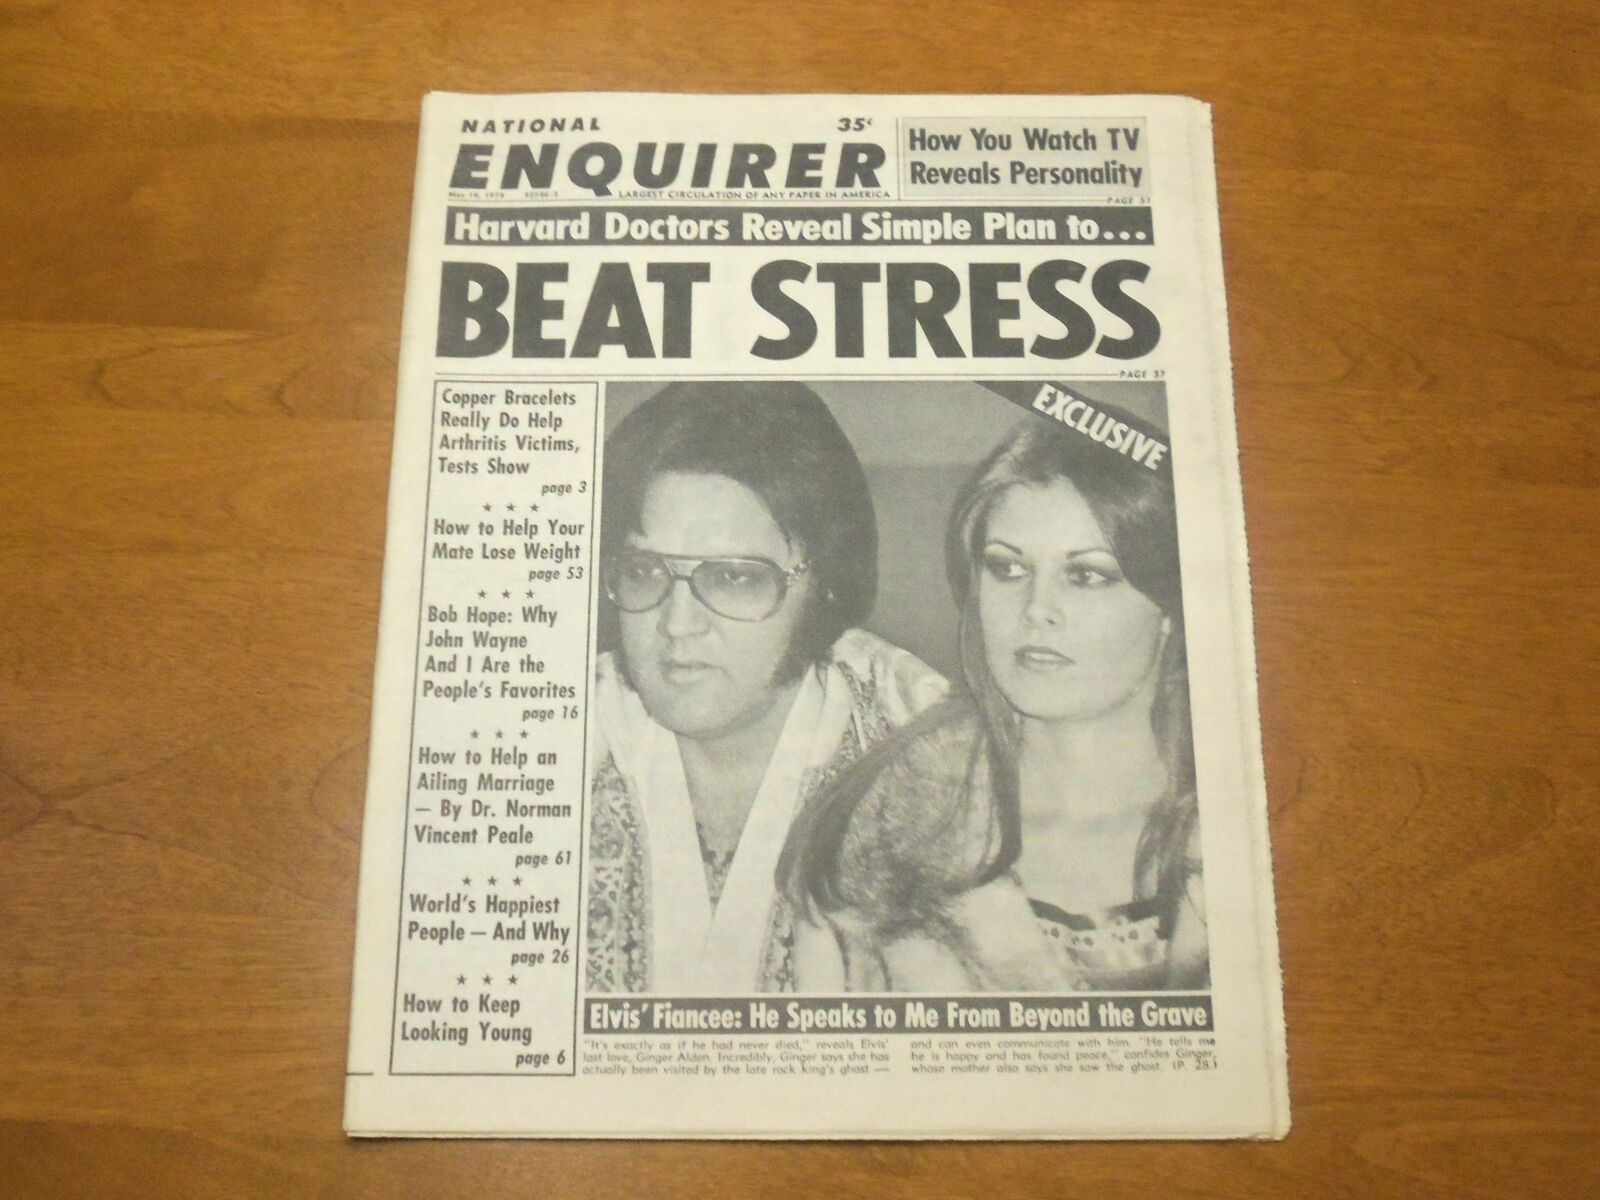 1978 MAY 16 NATIONAL ENQUIRER NEWSPAPER - ELVIS SPEAKS TO ME FRON GRAVE- NP 4754